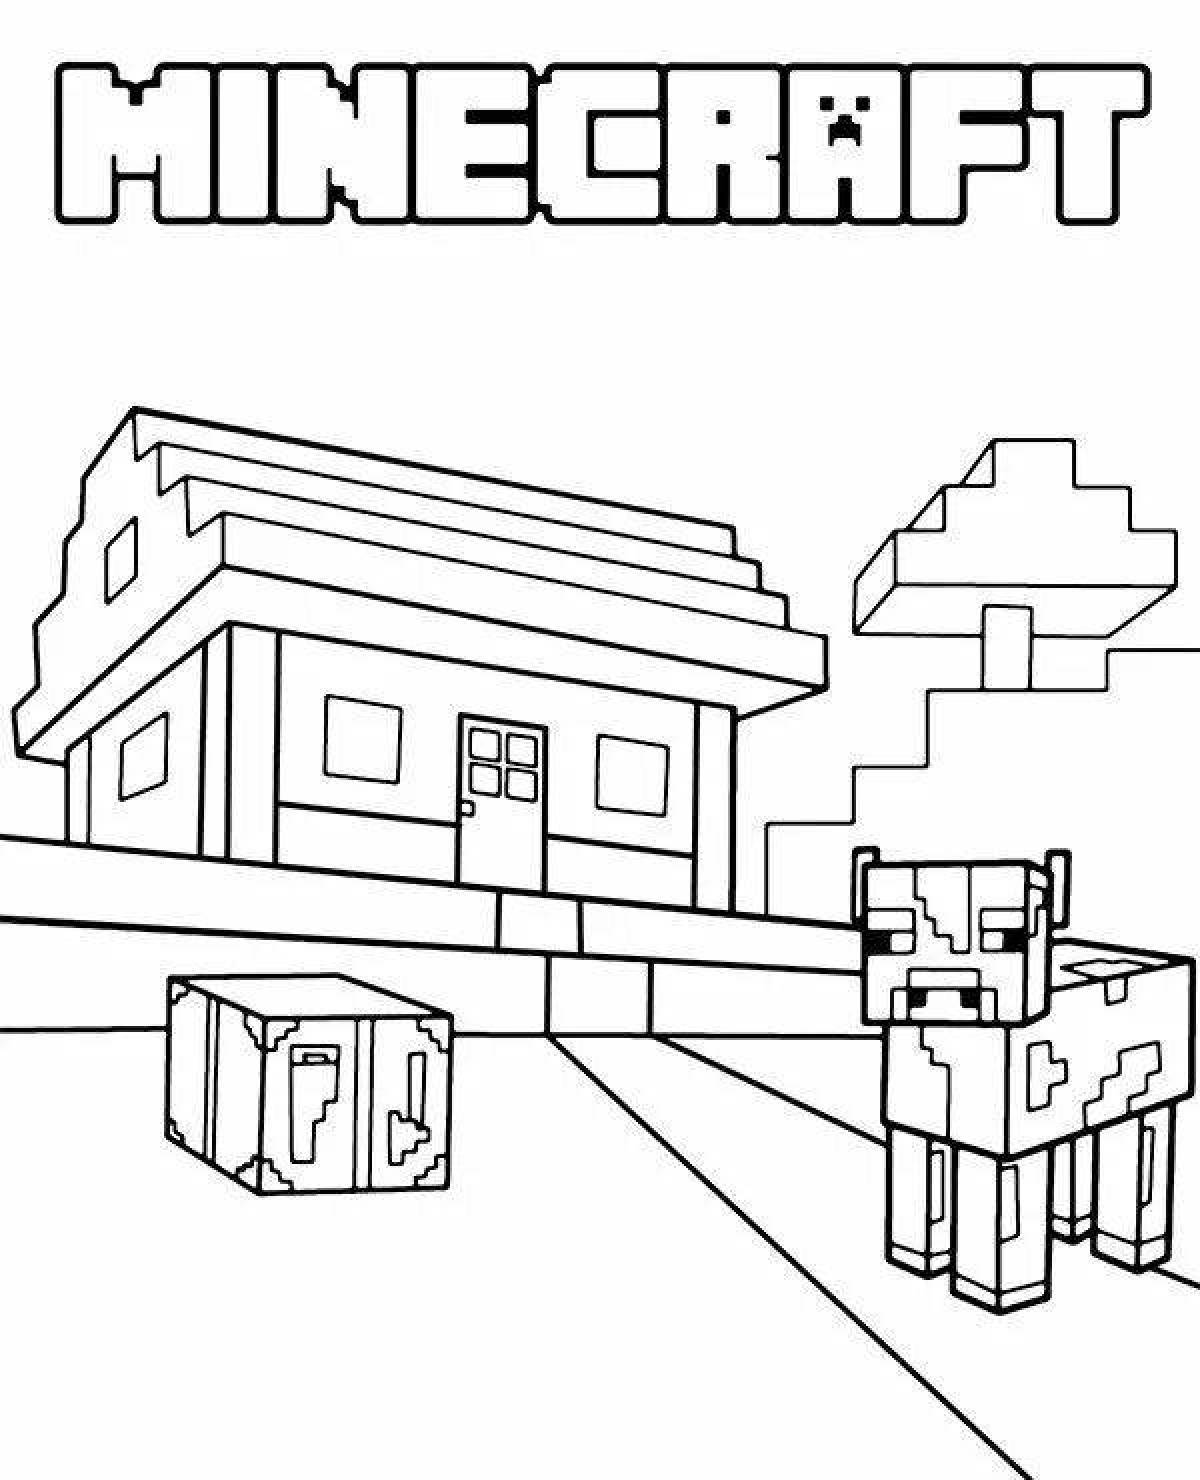 Amazing colored minecraft villager coloring page